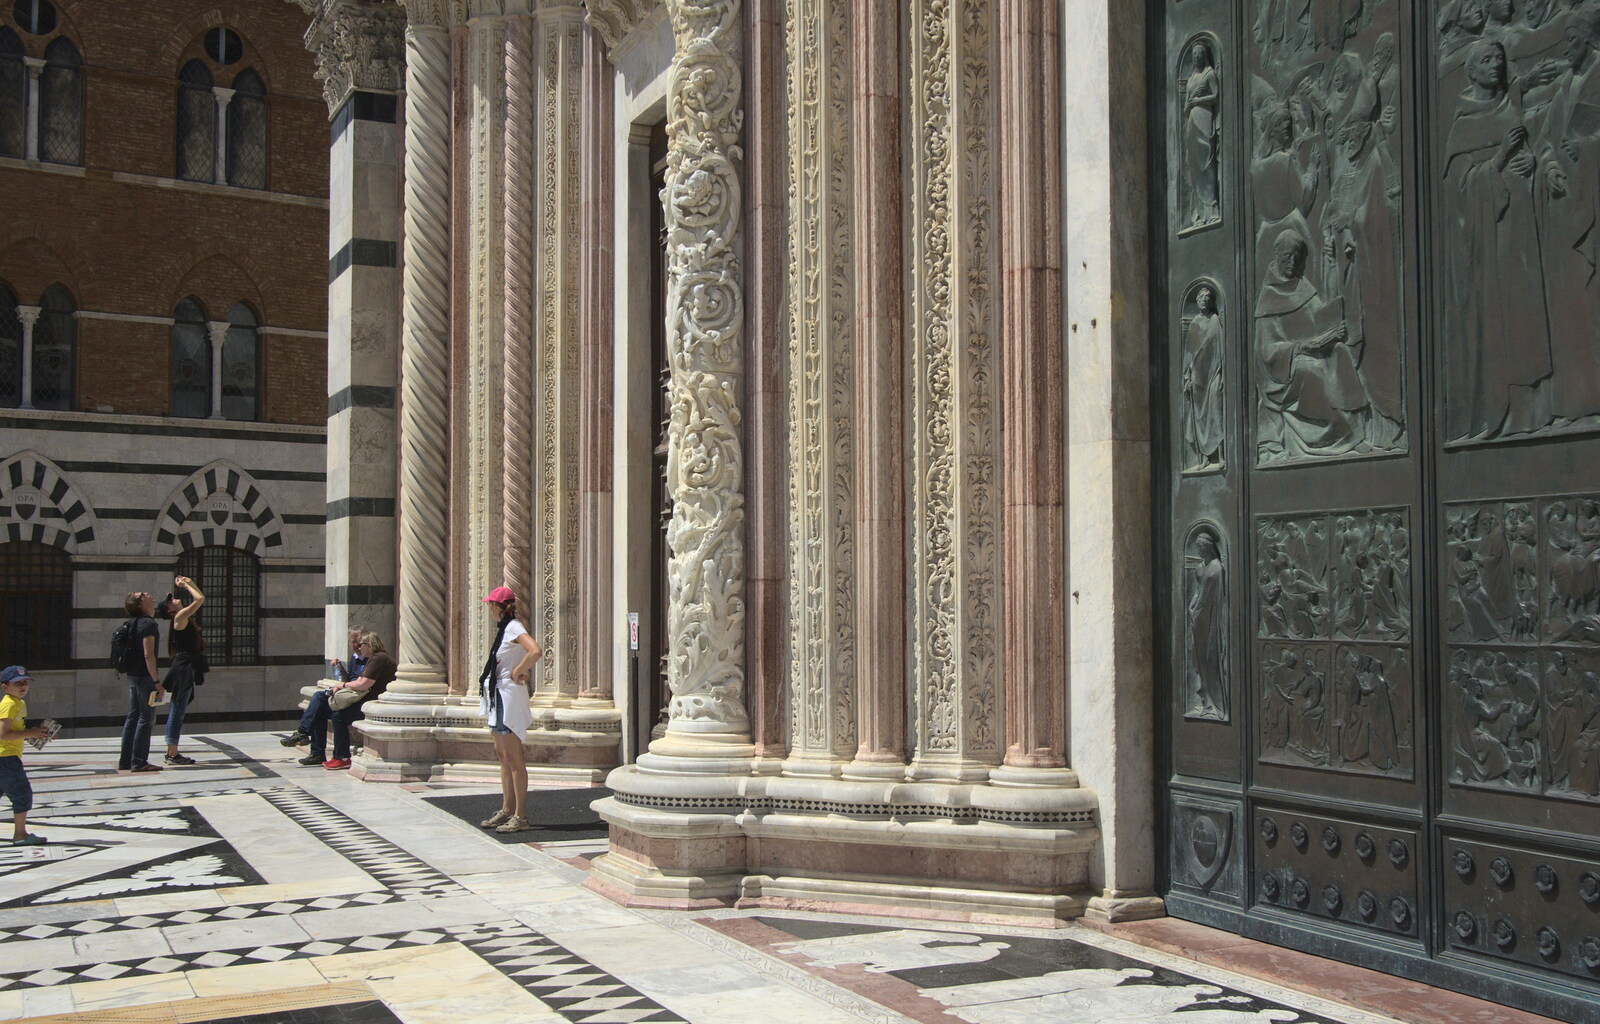 A Tuscan Winery and a Trip to Siena, Tuscany, Italy - 10th June 2013: The main entrance to the duomo